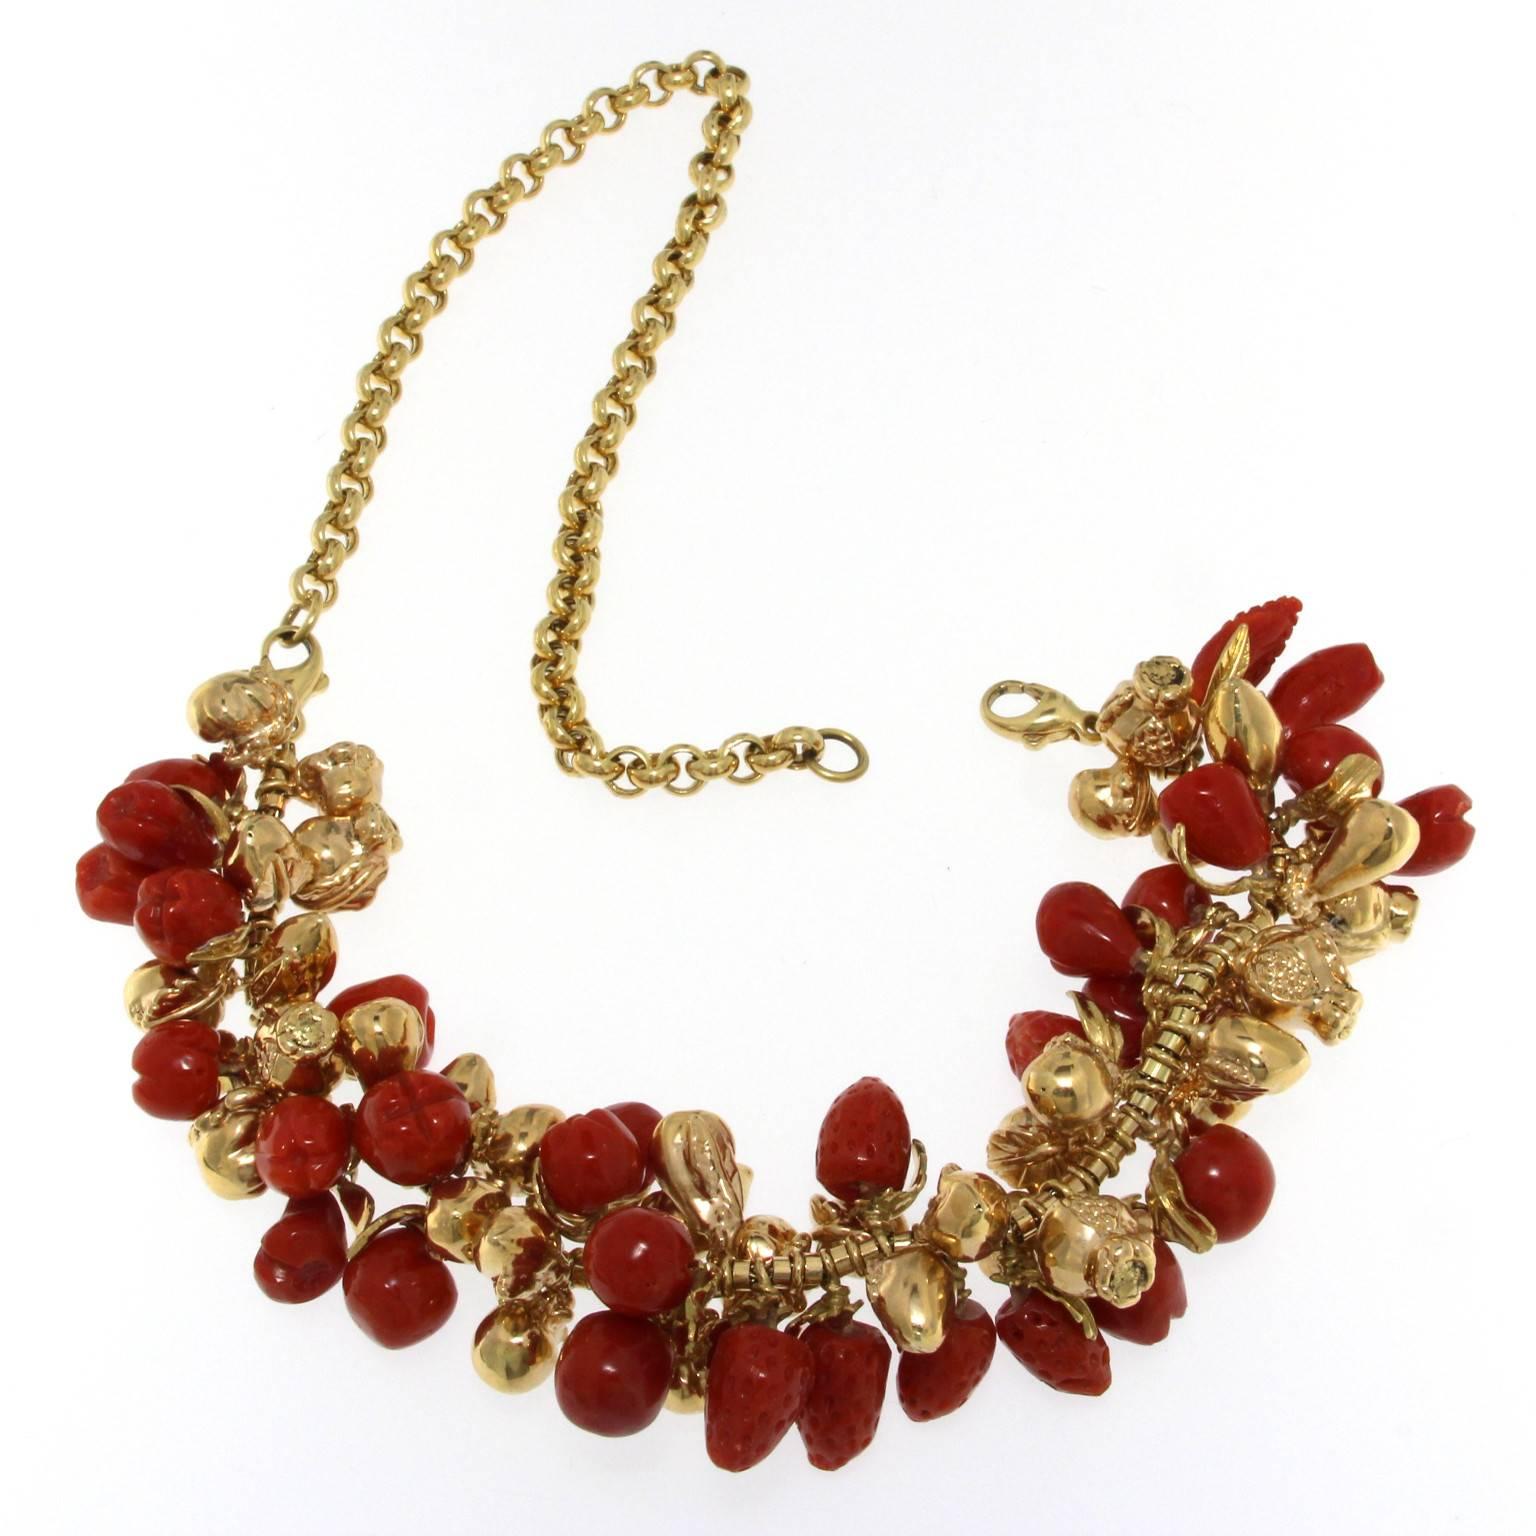 Coral and 18kt yellow gold fruit necklace
The front part can be worn as a bracelet taking out the back since it has 2 clasps. 
Total weight of 18 kt gold: gr 56.70
Total weight of red coral: gr 27.40
Stamp: 10 MI, 750, ITALY